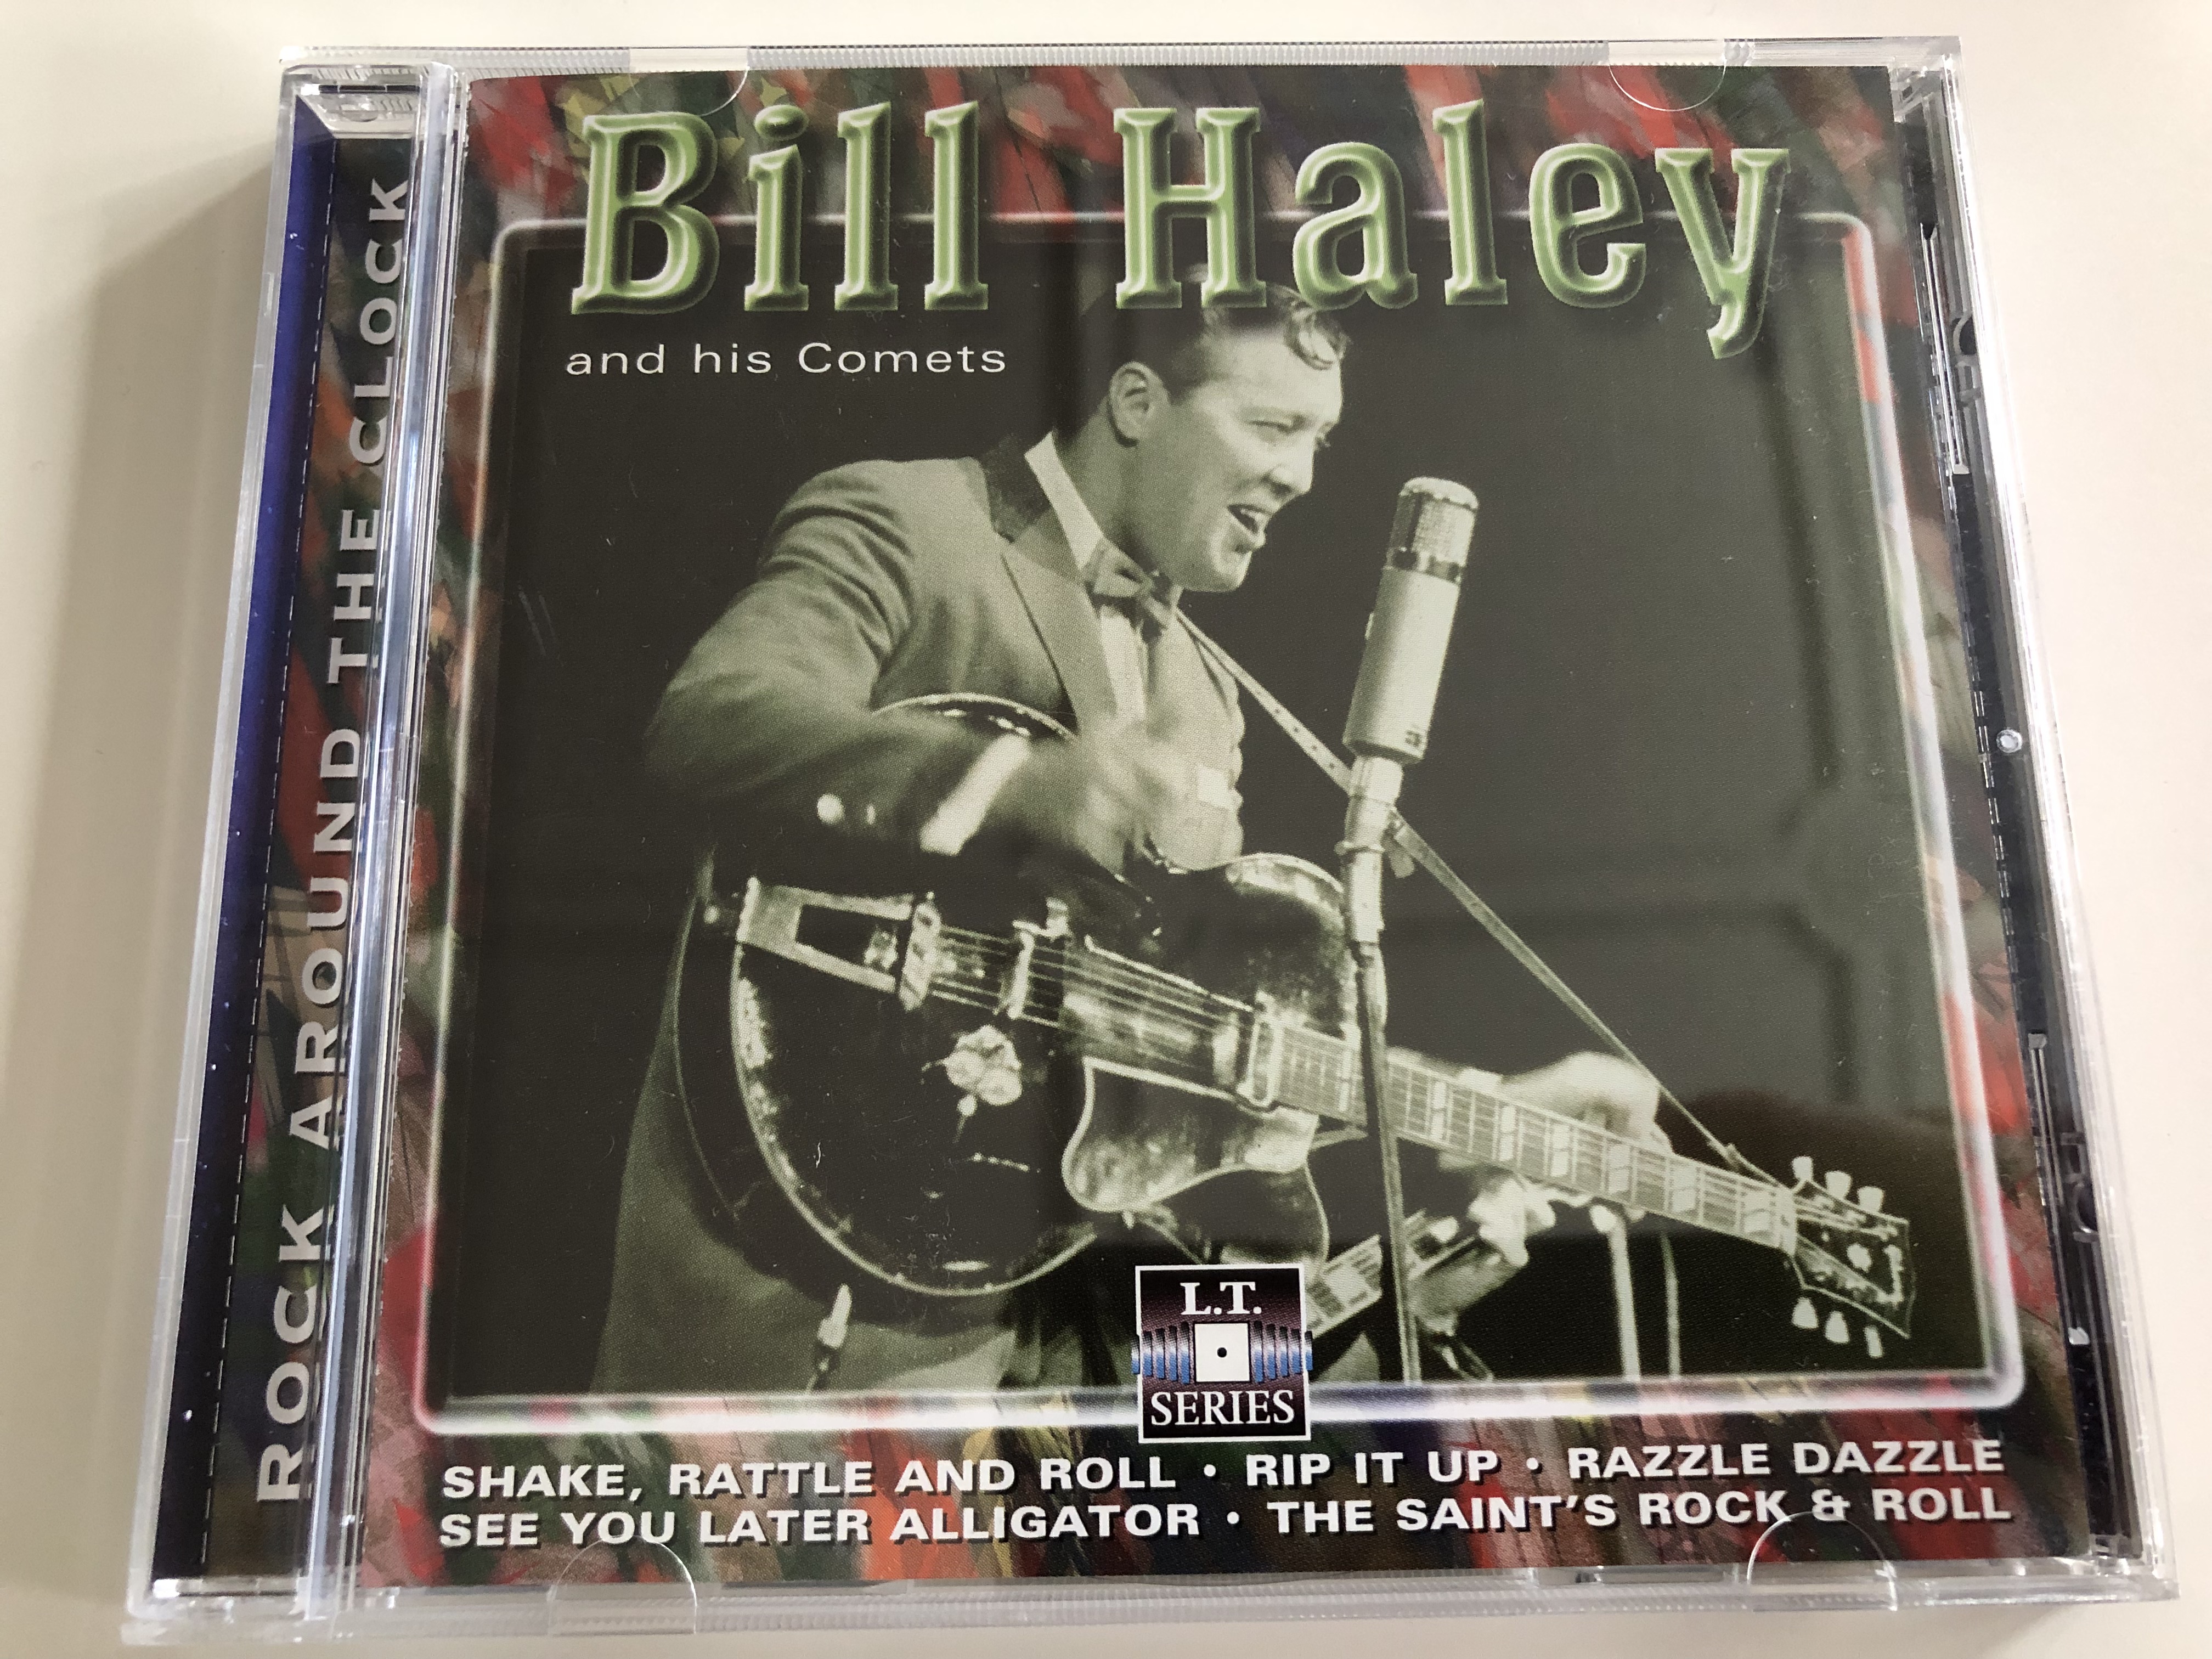 bill-haley-and-his-comets-rock-around-the-clock-shake-rattle-and-roll-rip-it-up-razzle-dazzle-see-you-later-alligator-the-saints-rock-and-roll-life-time-audio-cd-2008-lt-5016-1-.jpg